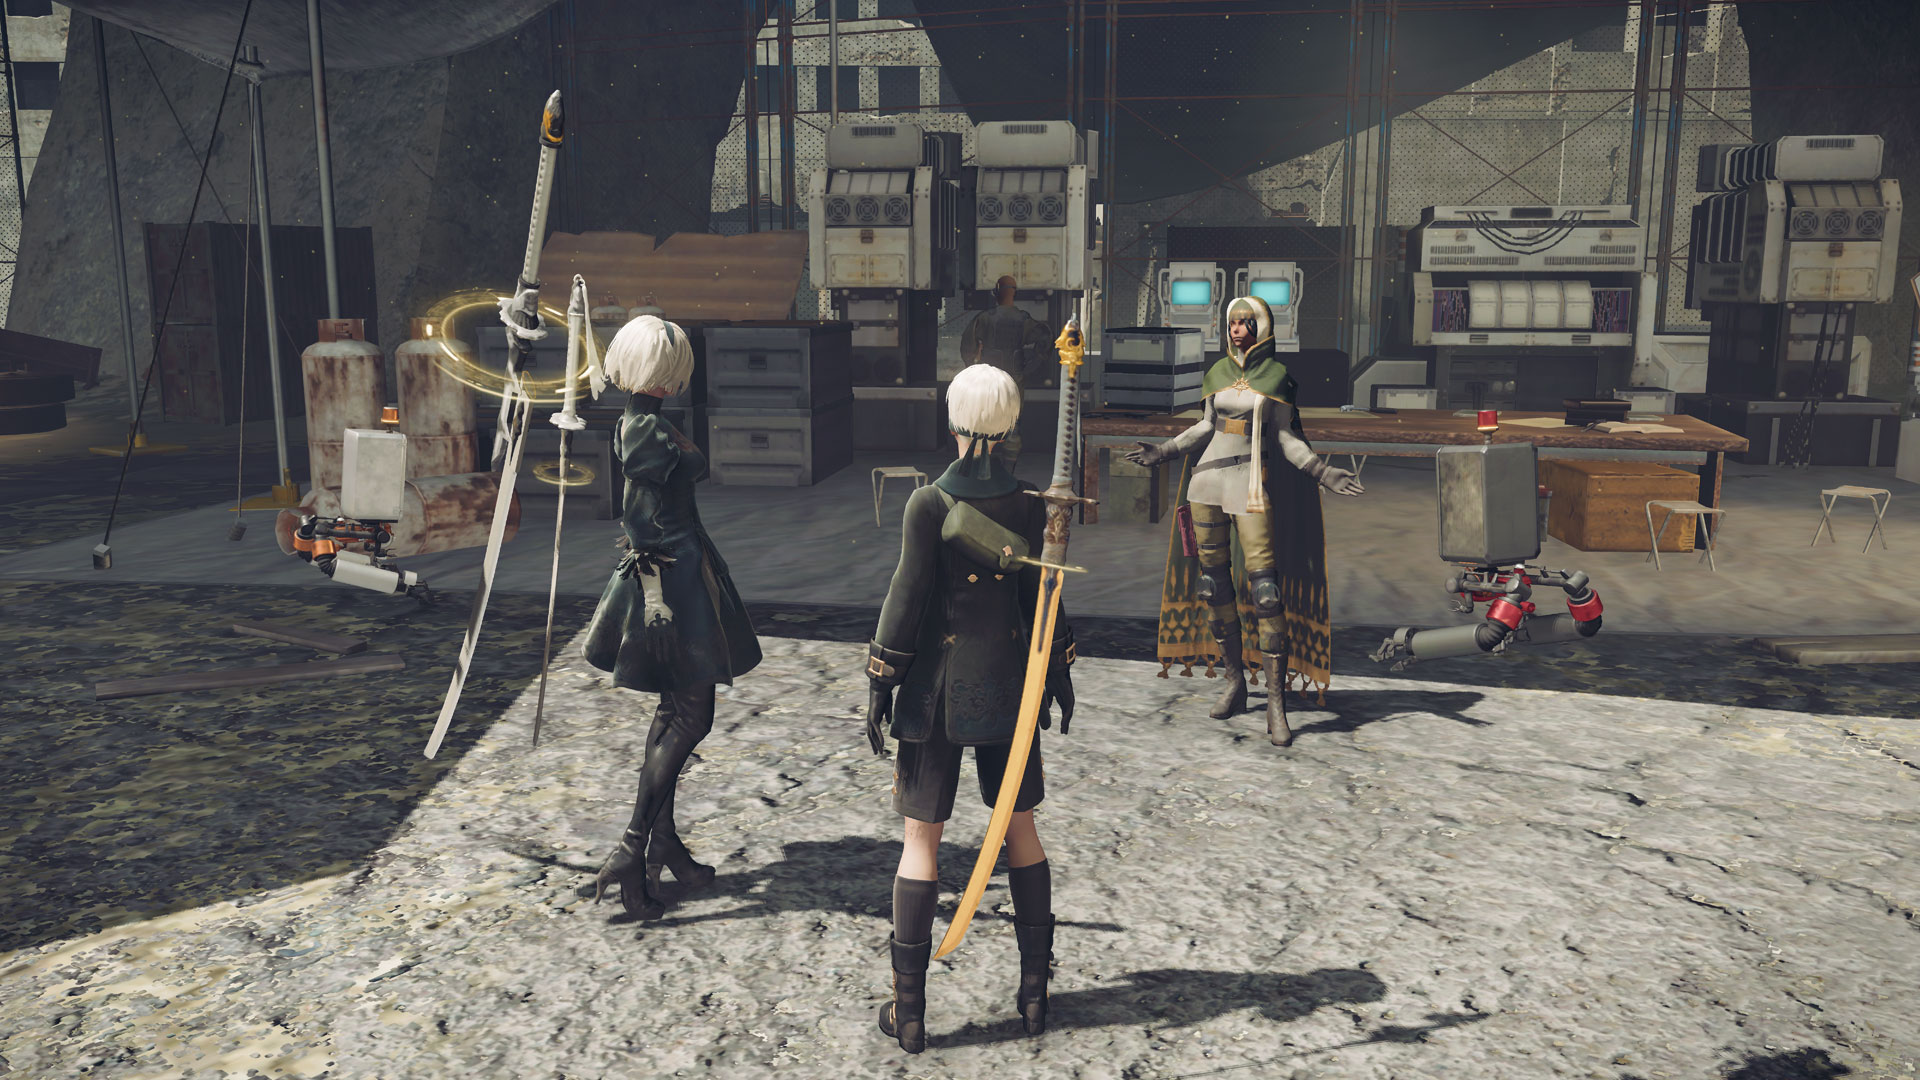 Nier automata game of the edition